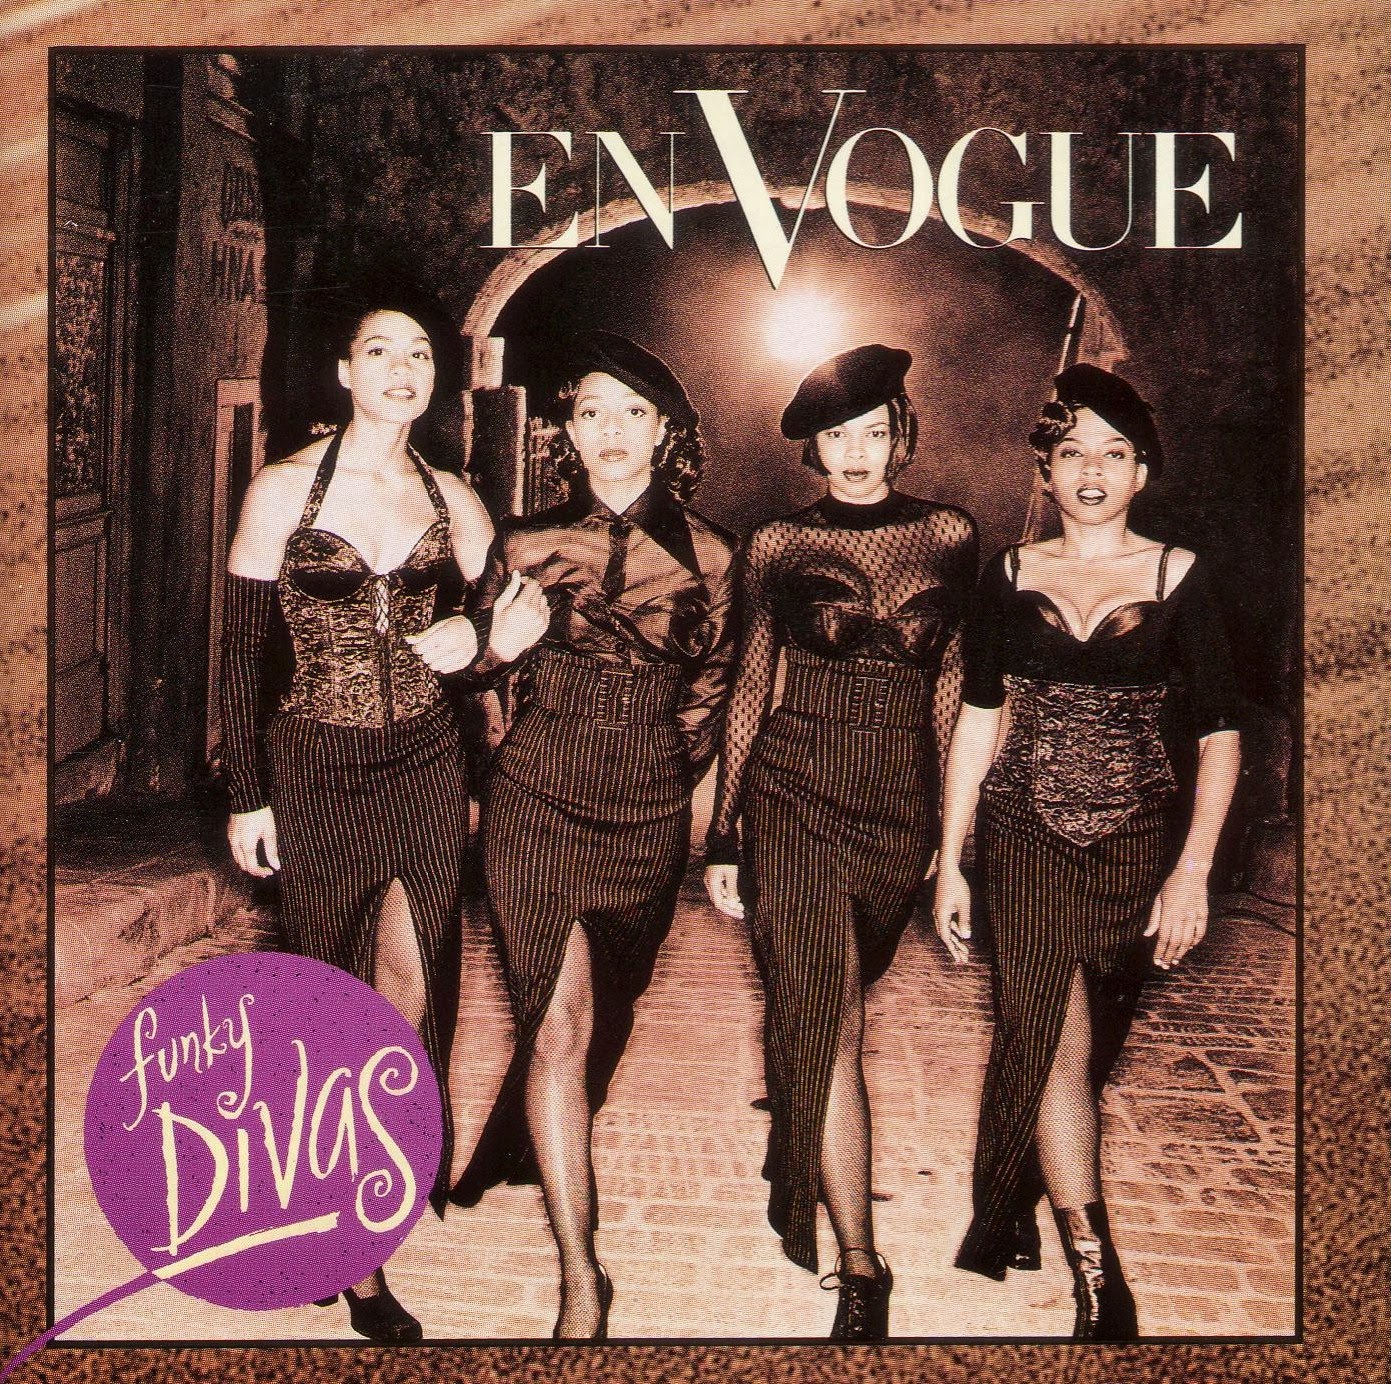 Hysterically Assertive.: WANDA WAS THE *FIFTH* MEMBER OF *EN VOGUE